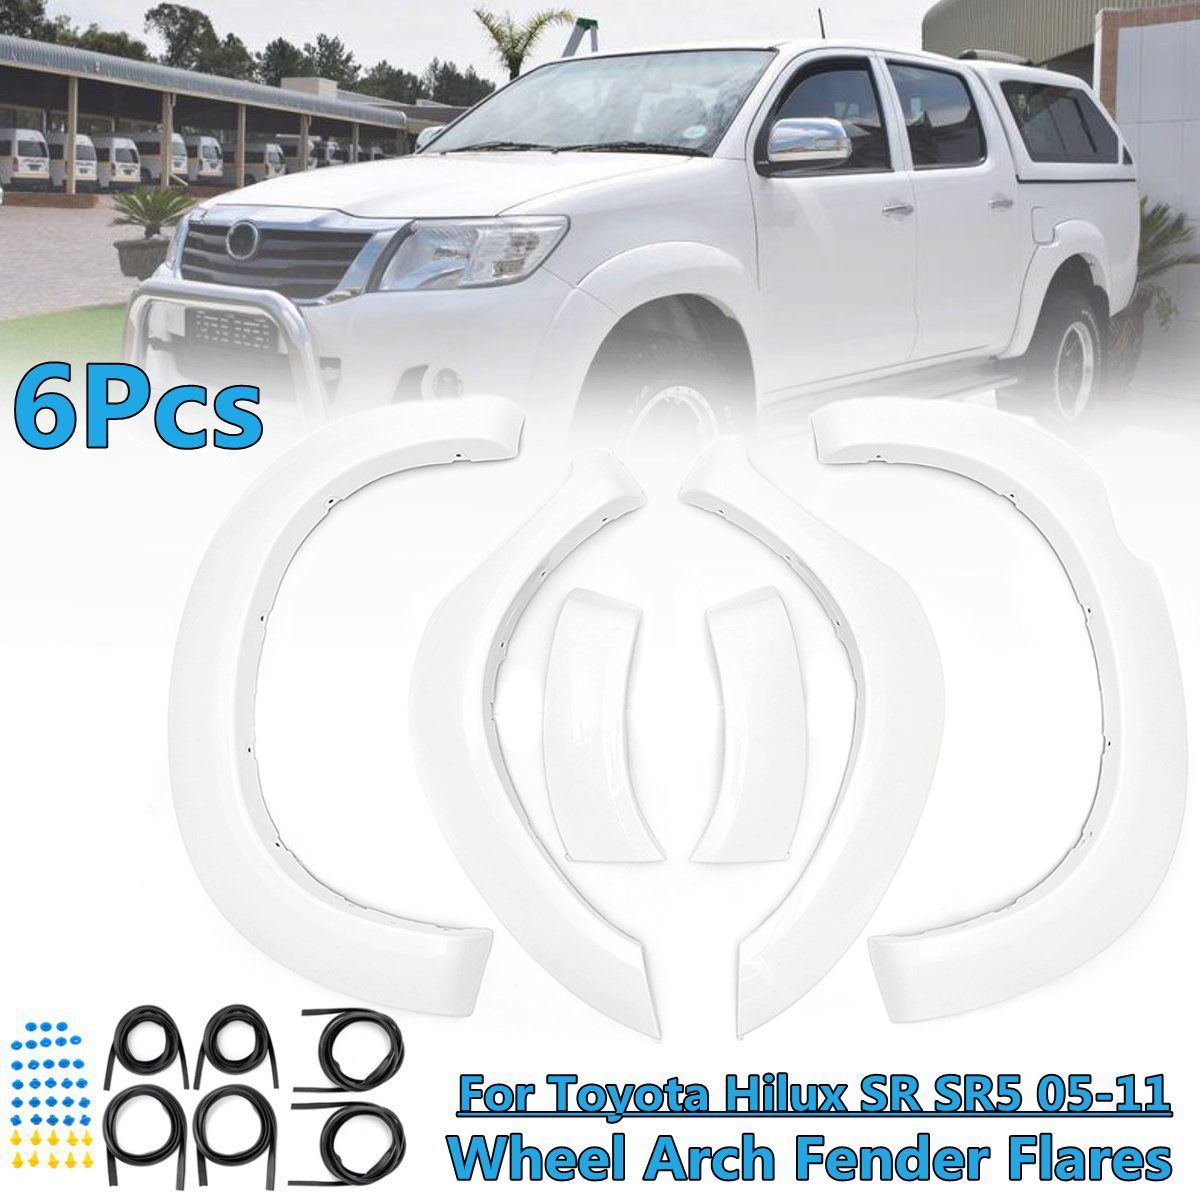 Pair-New-White-Front-Wheel-Fender-Flares-For-Toyota-Hilux-2005-2011-1486018